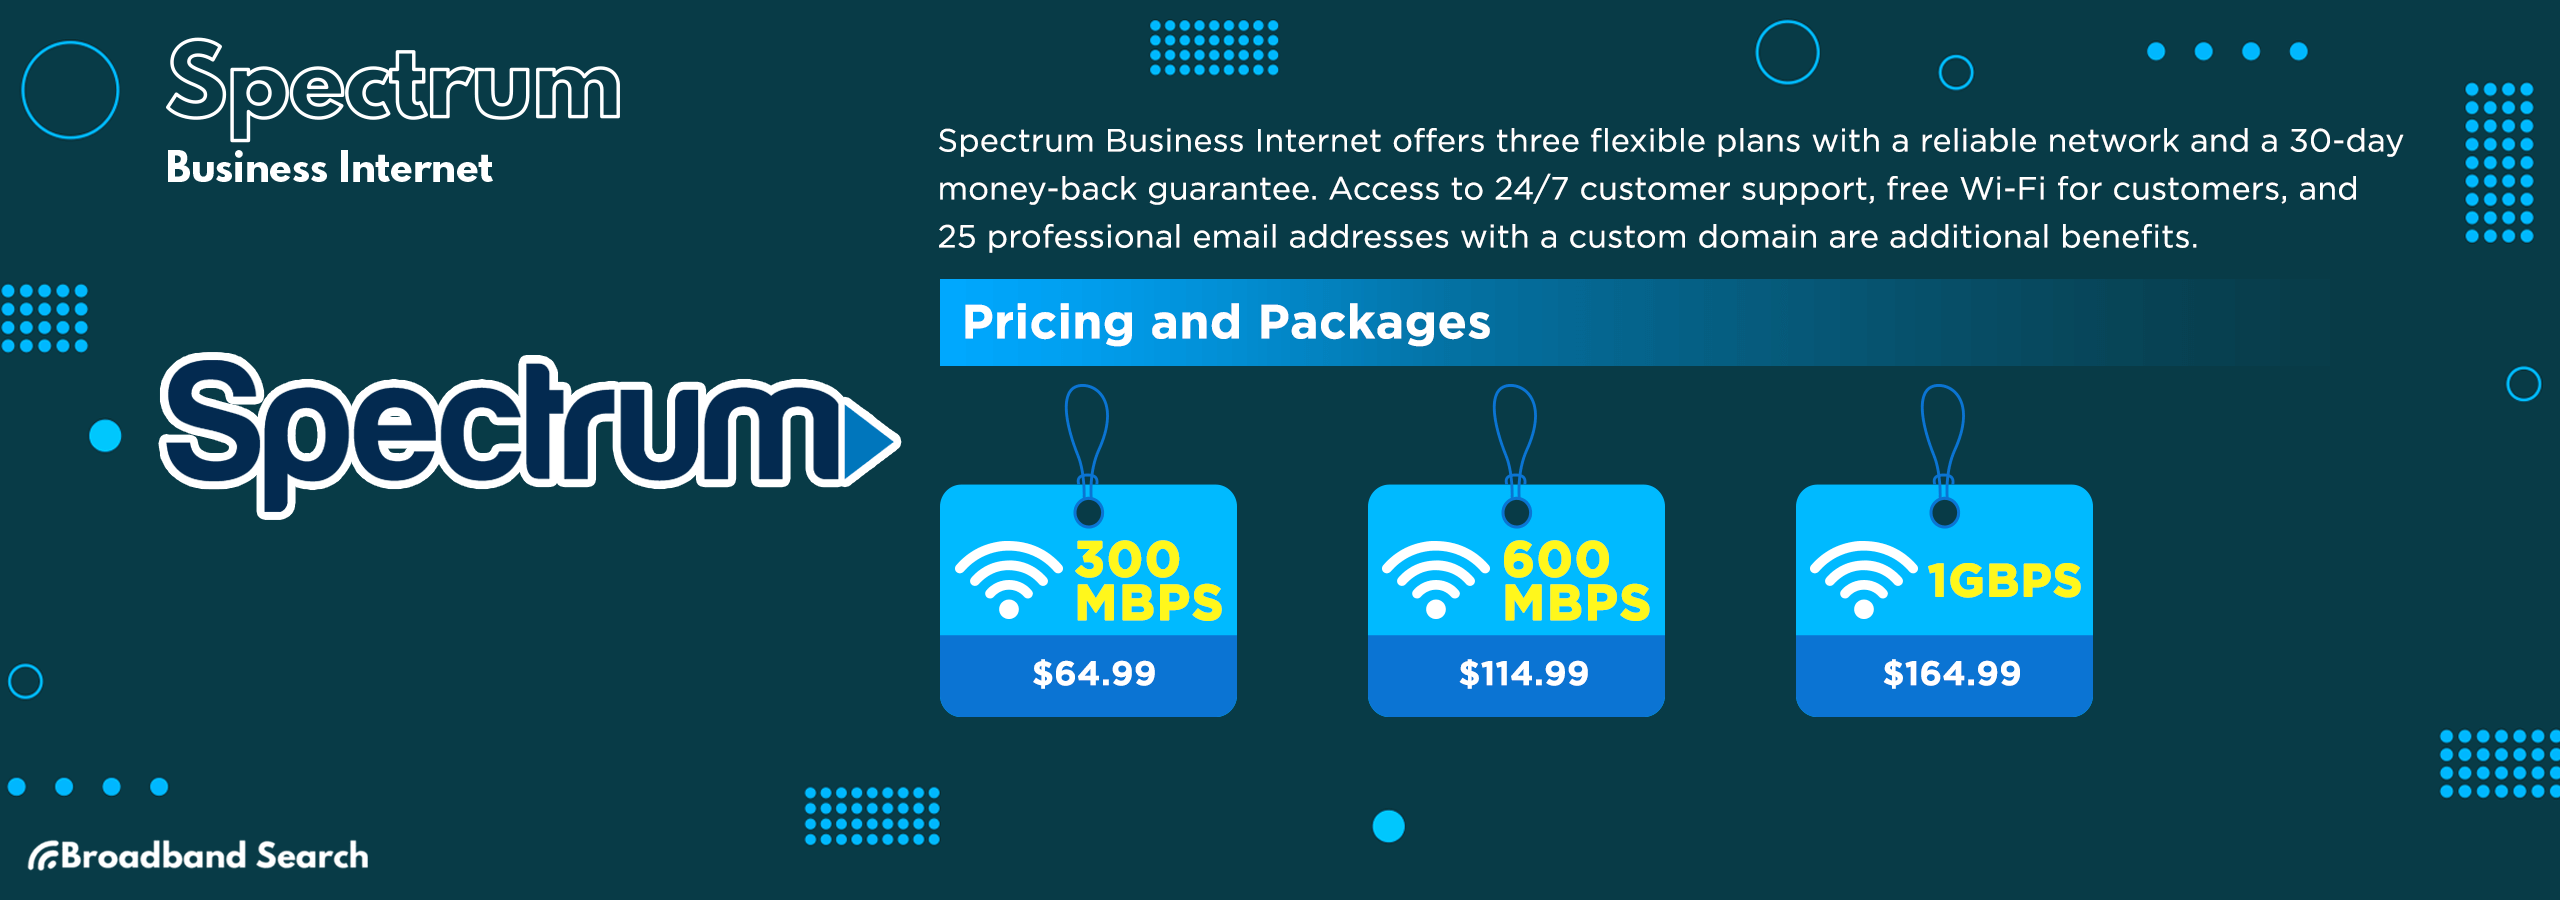 Spectrum business internet plan details, pricing, and packages